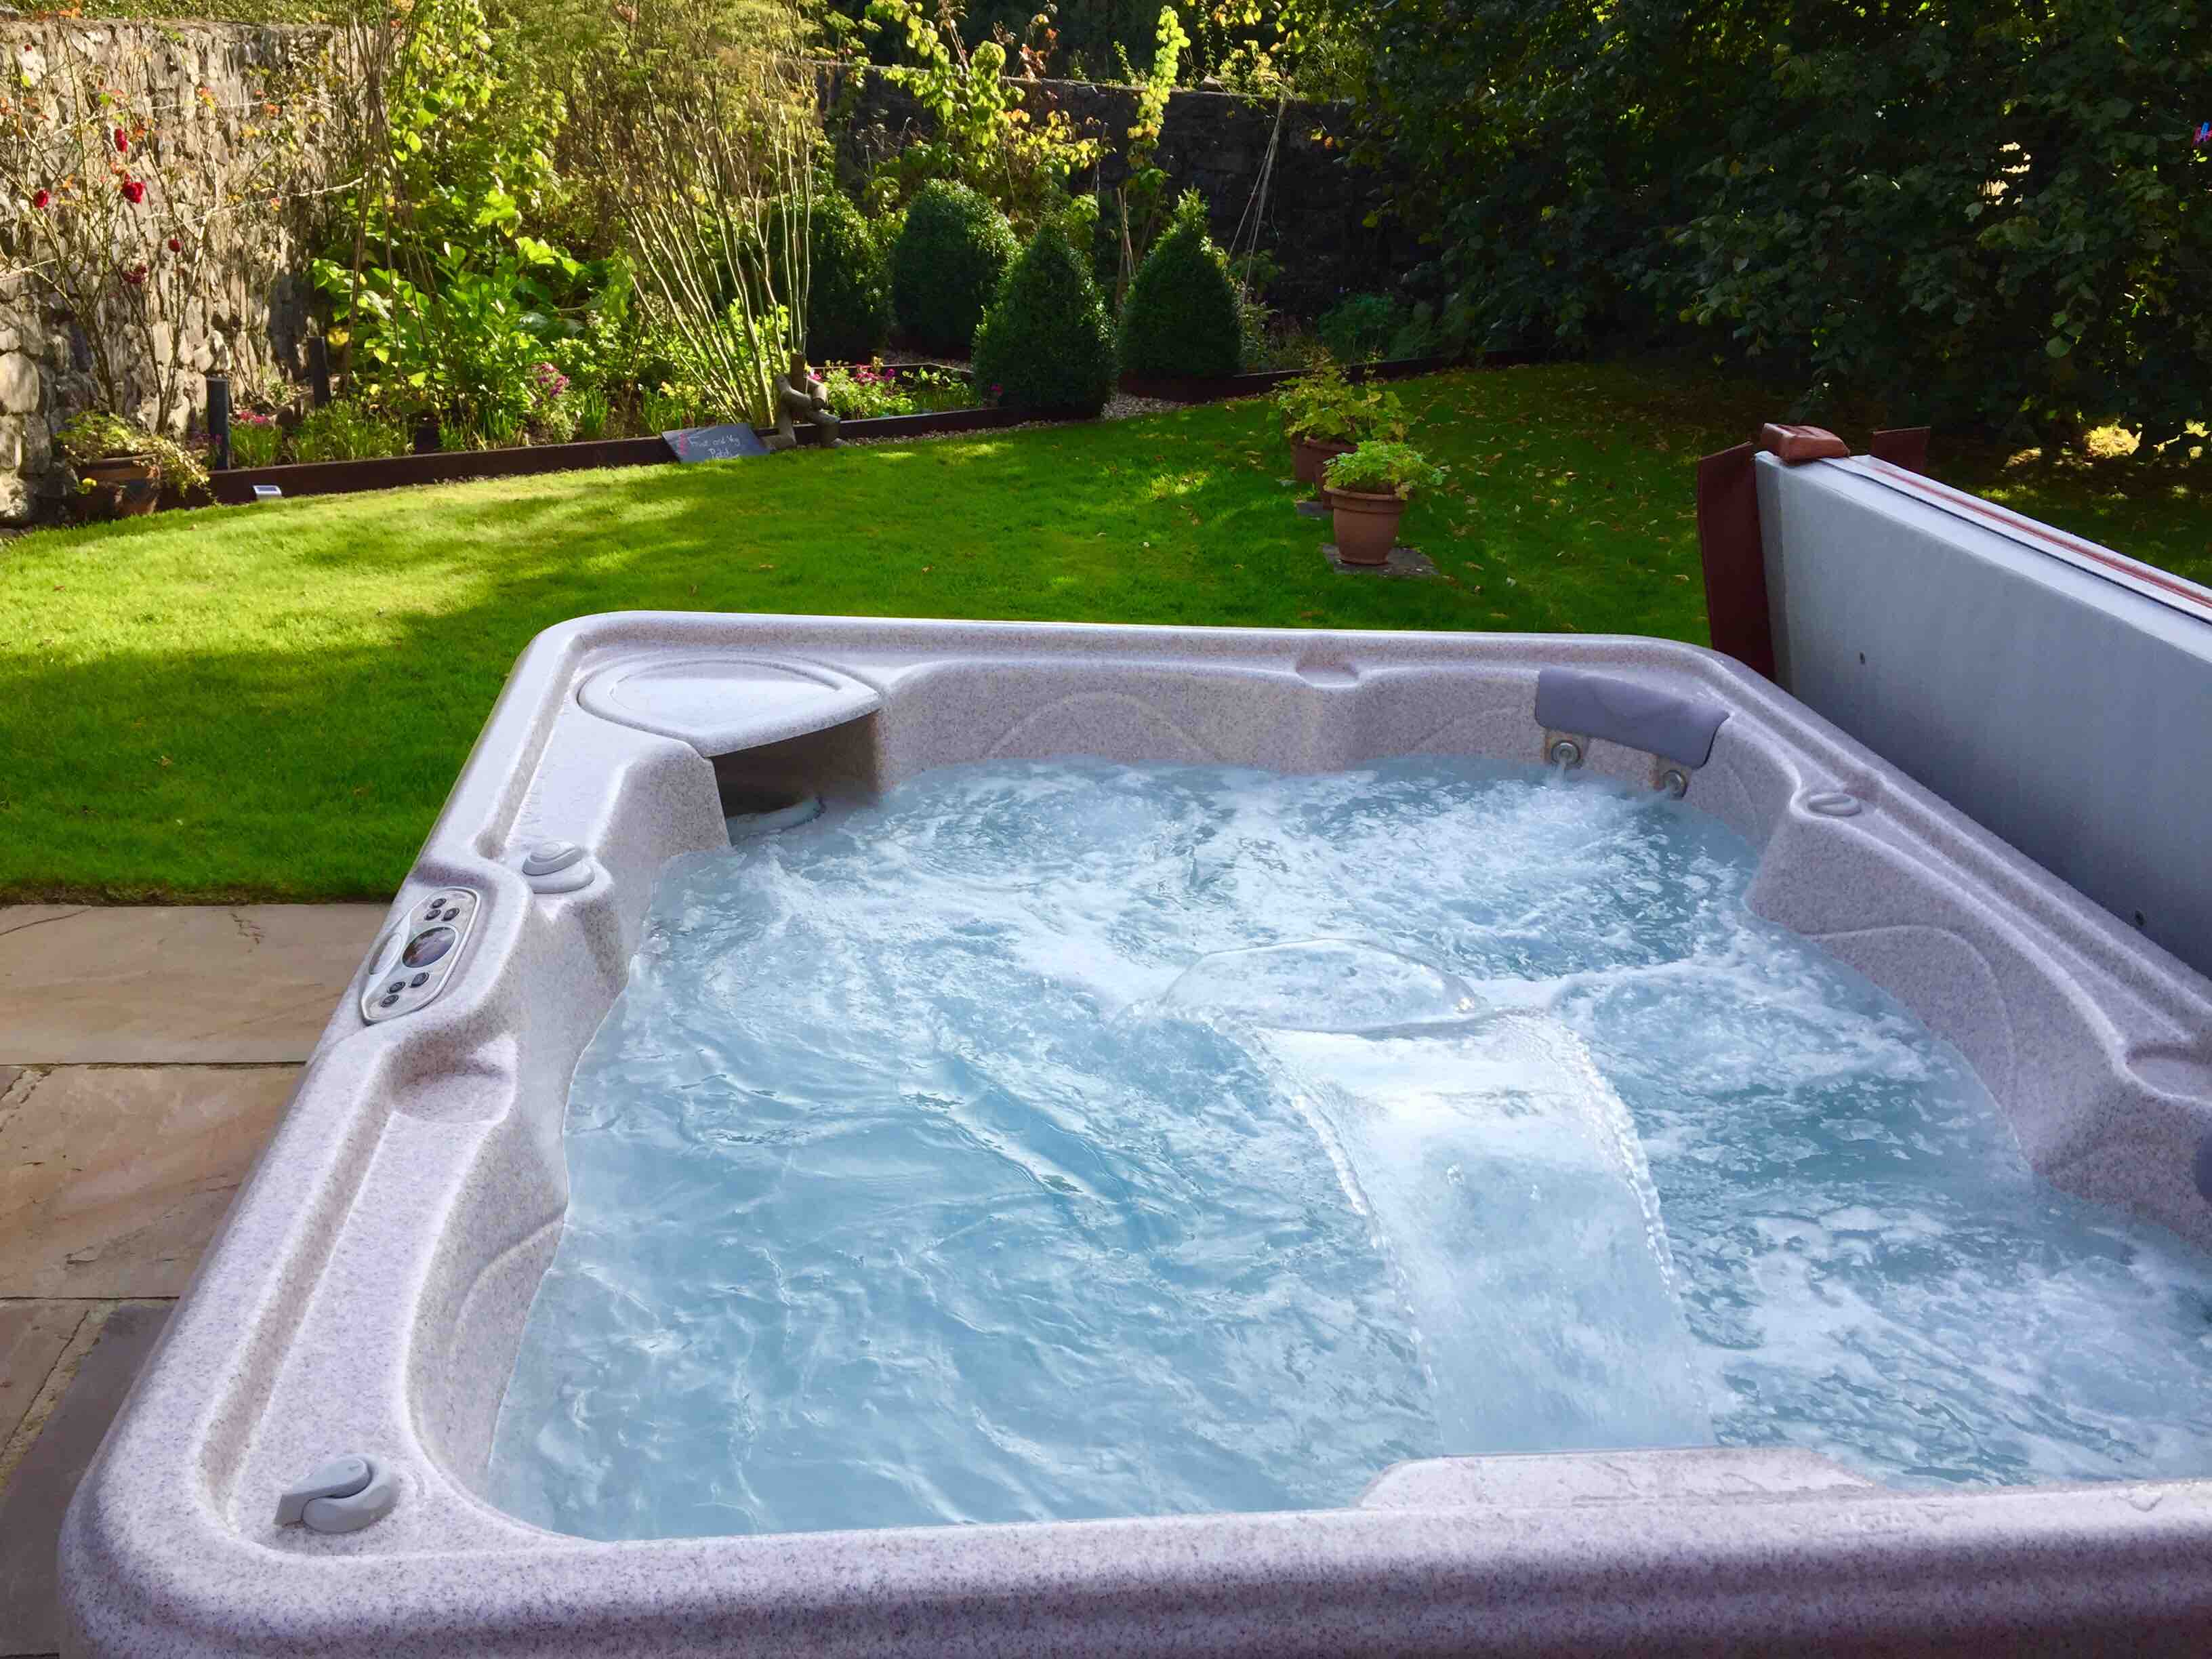 5⭐️ LUXURY COTTAGE WITH PRIVATE HOT TUB, GALWAY - Houses for Rent in  Galway, Galway, Ireland